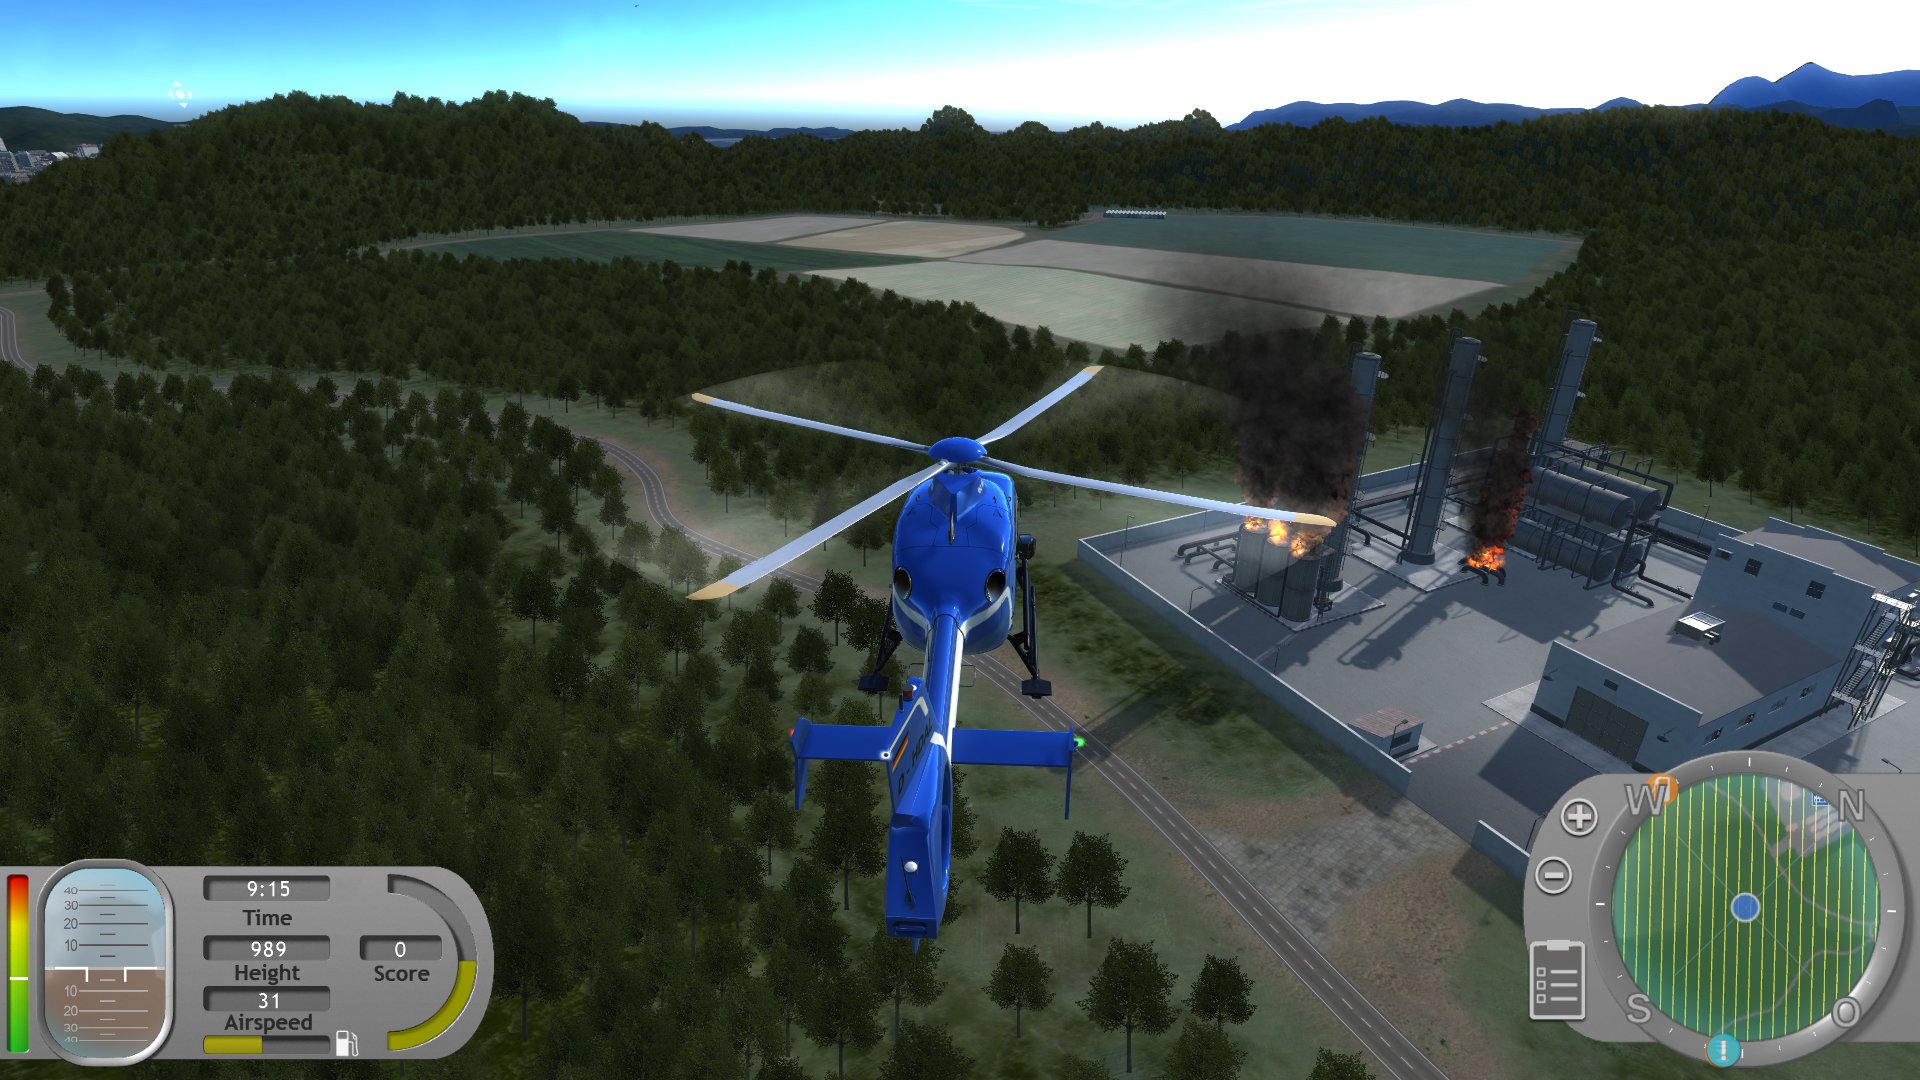 Police Helicopter Simulator 2